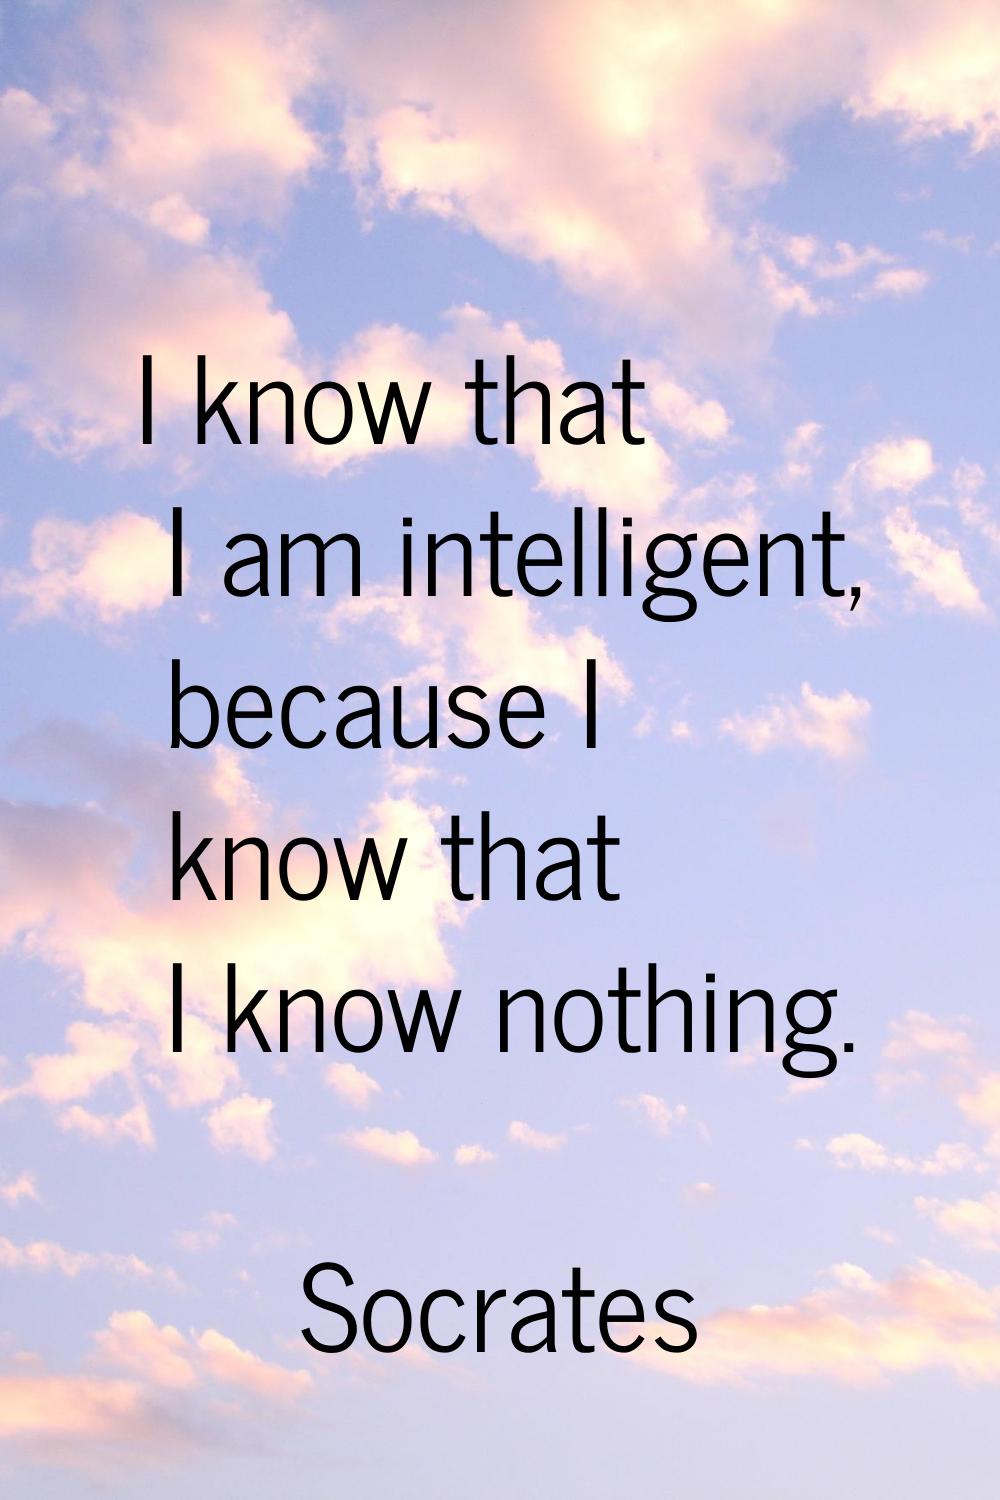 I know that I am intelligent, because I know that I know nothing.